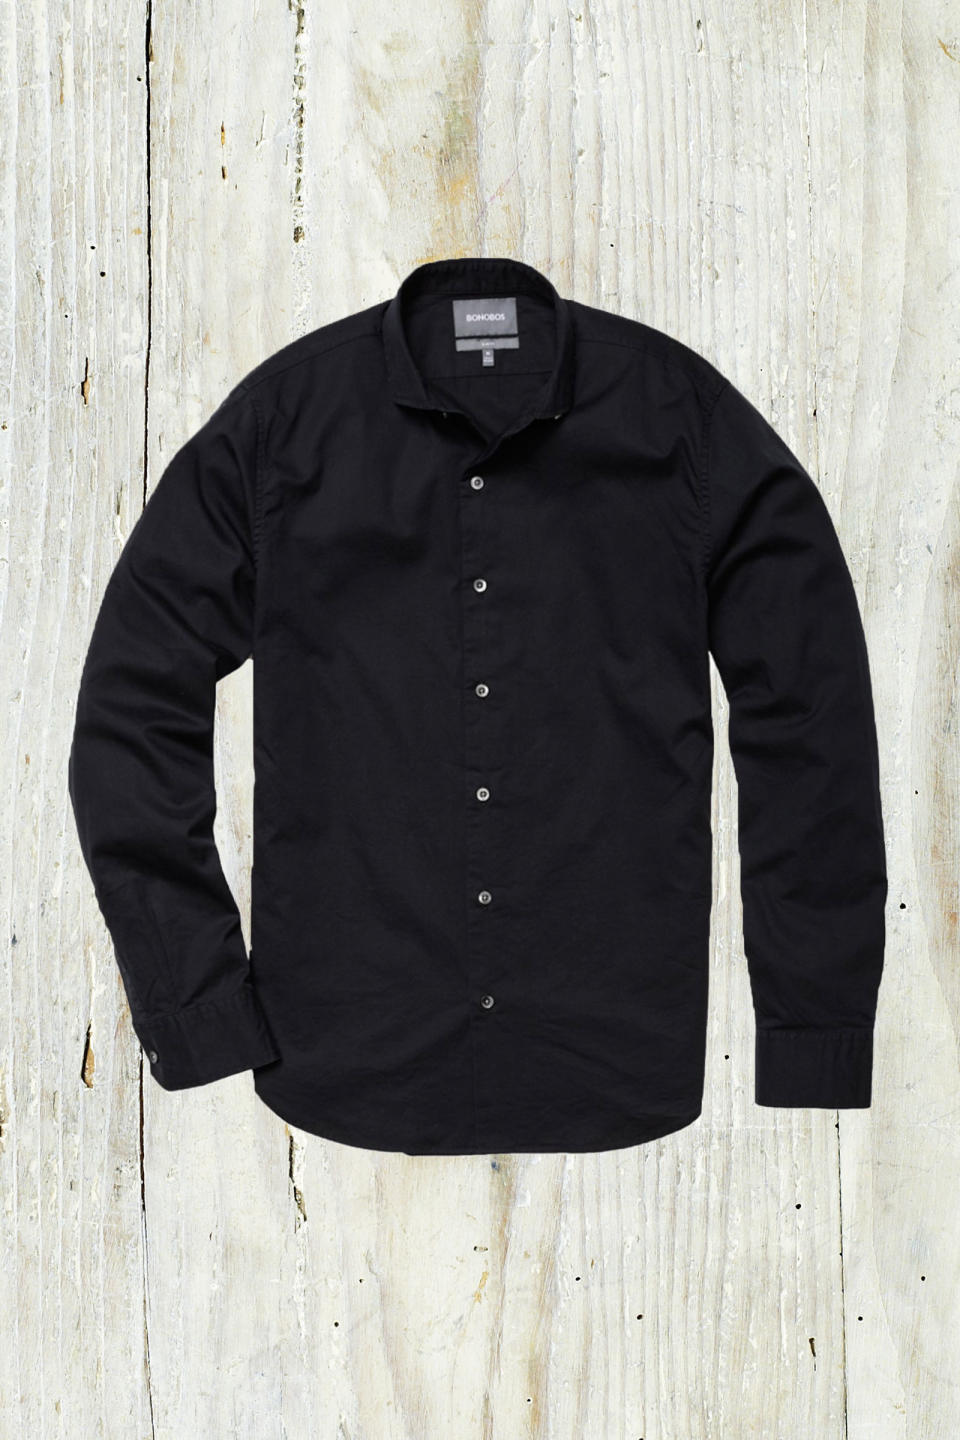 20) The Perfect Button-Down Shirt